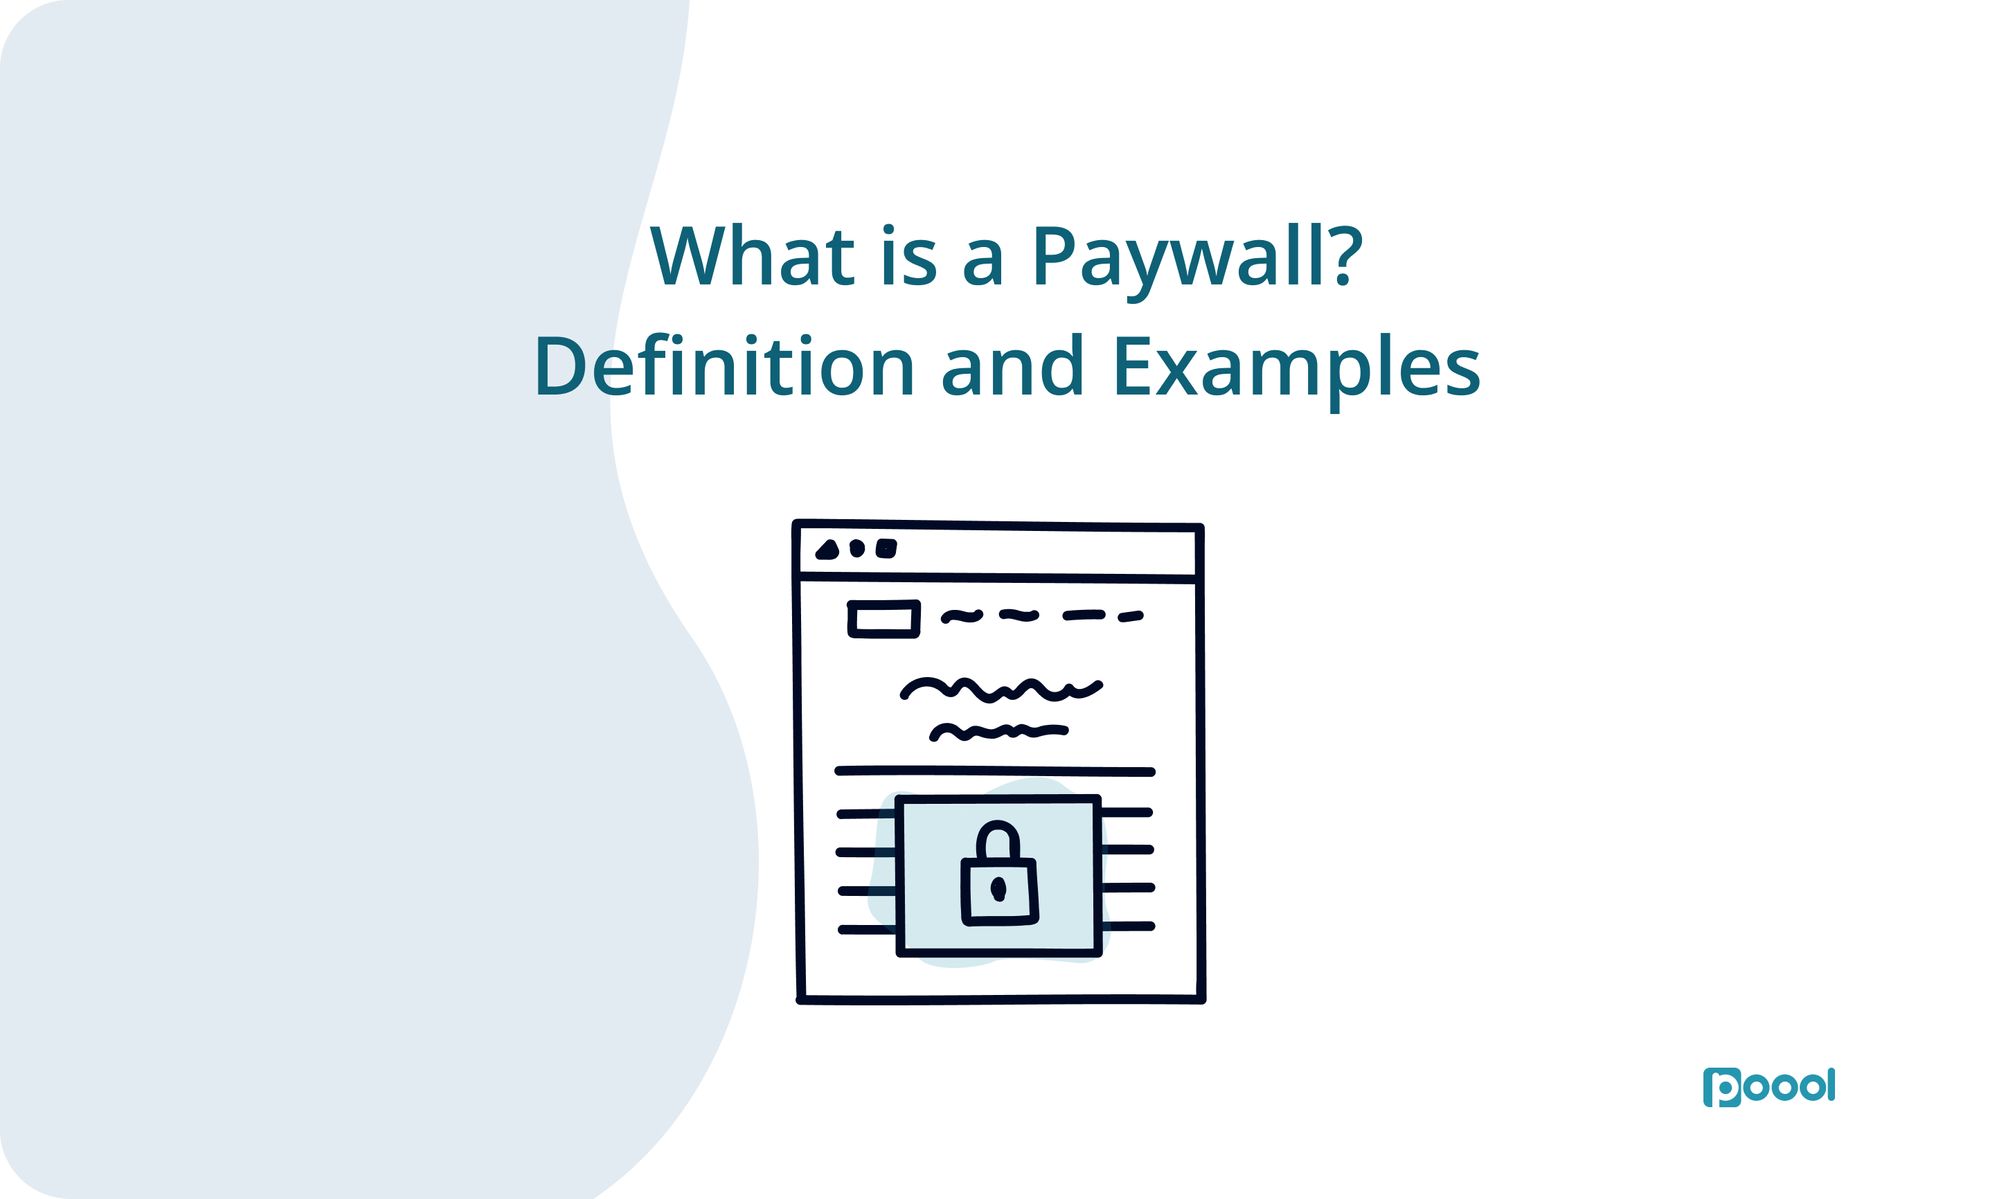 What is a Paywall? - Definition and Examples.